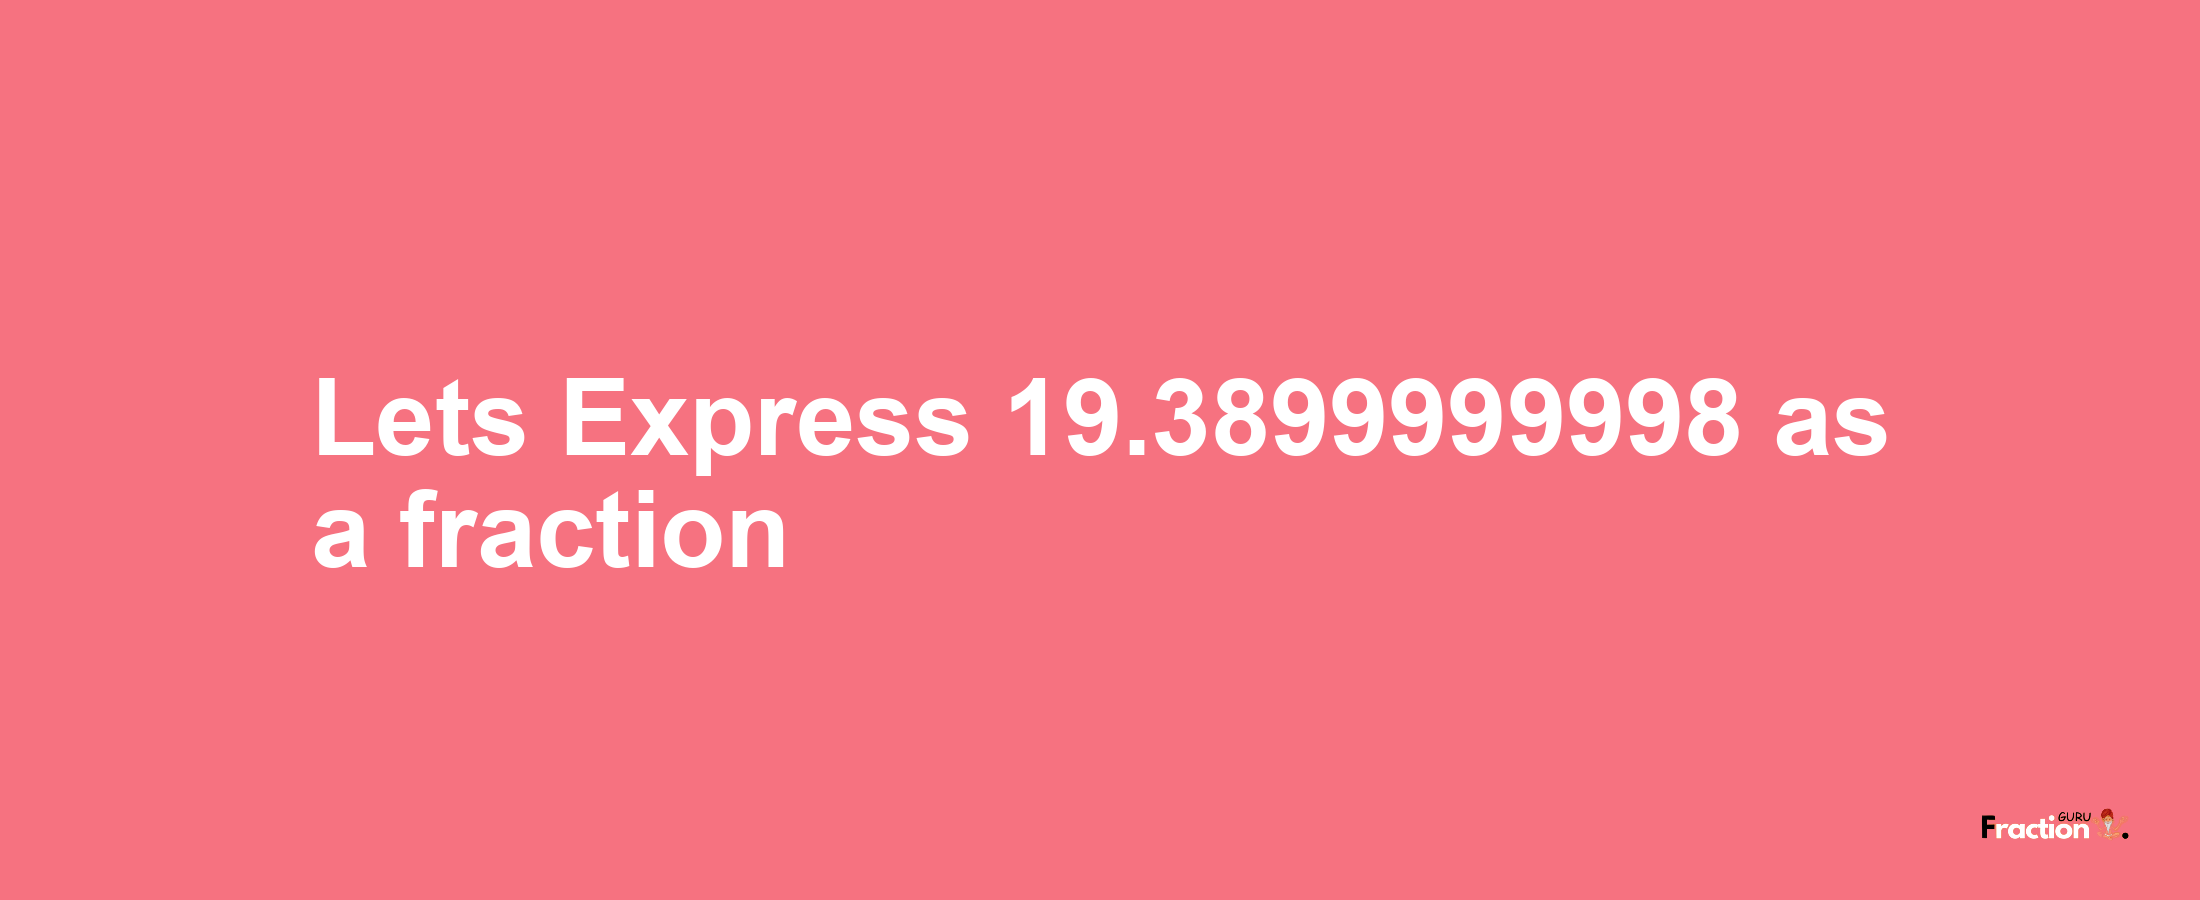 Lets Express 19.3899999998 as afraction